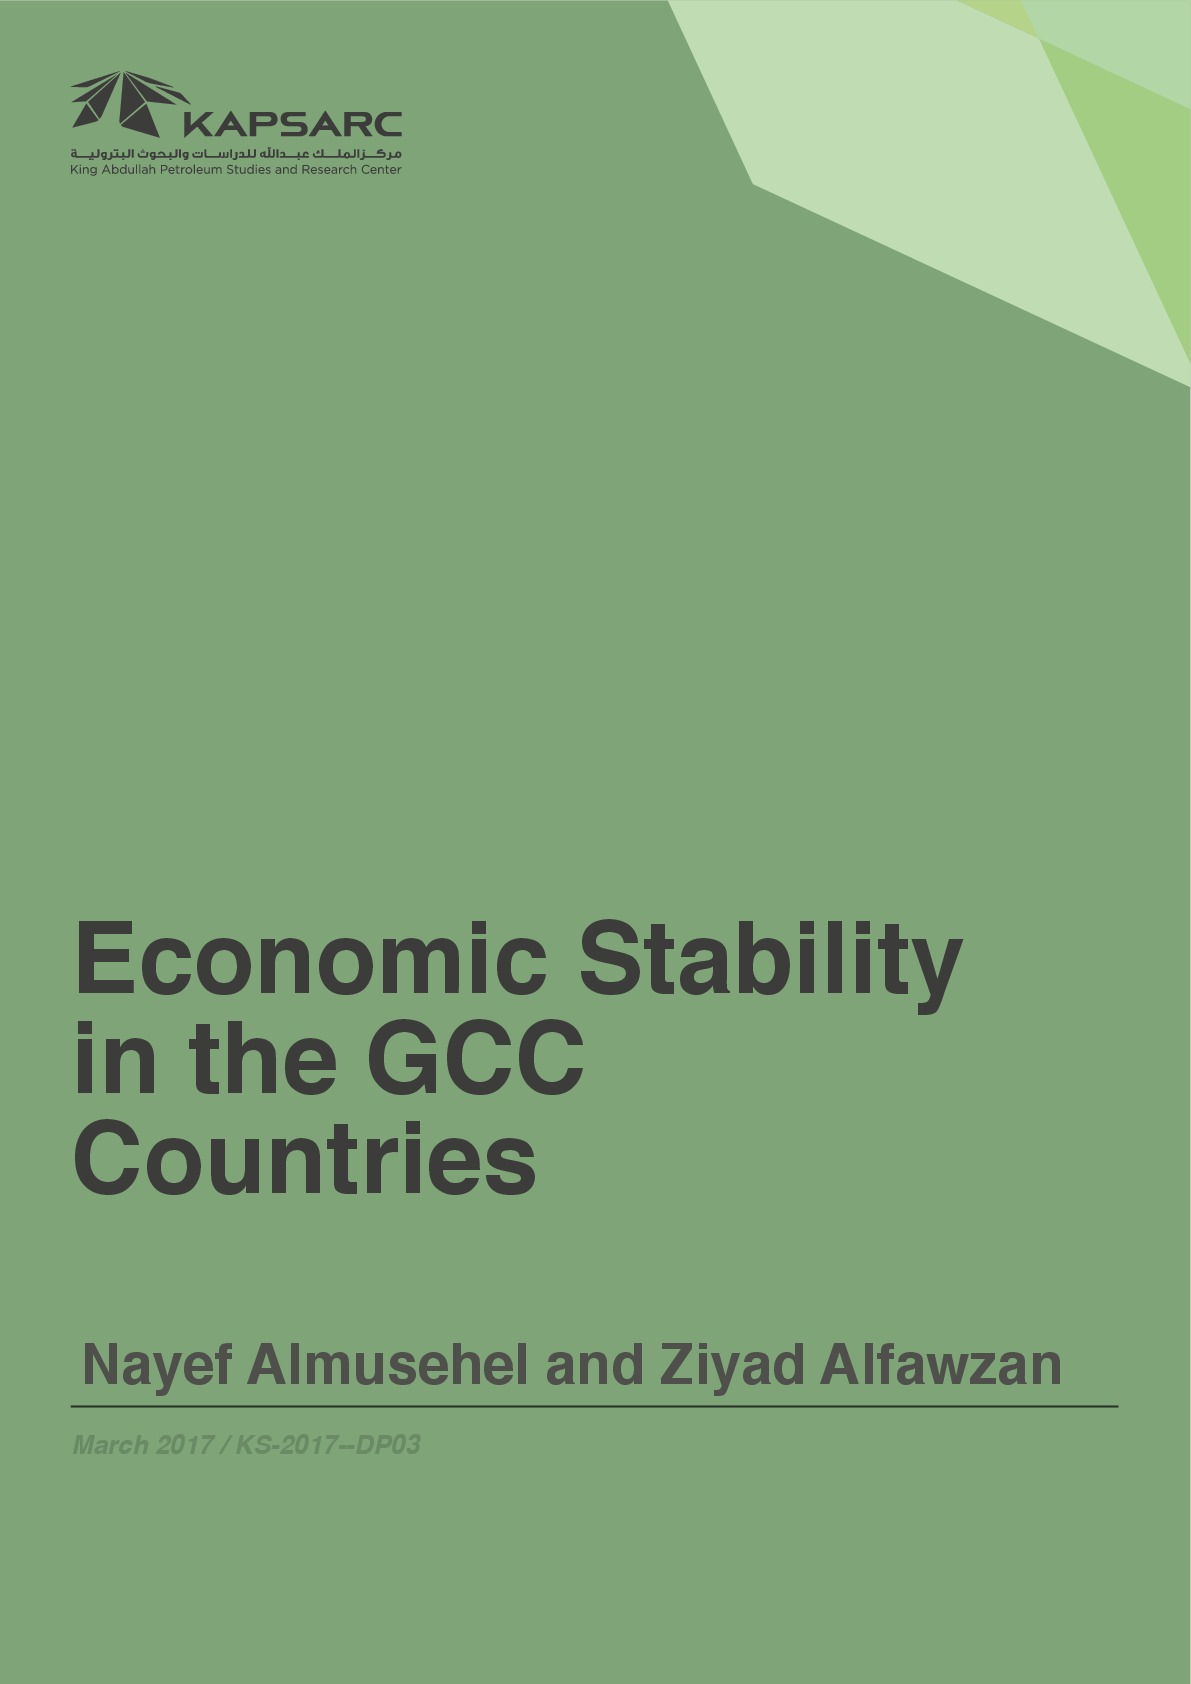 Economic Stability in the GCC Countries